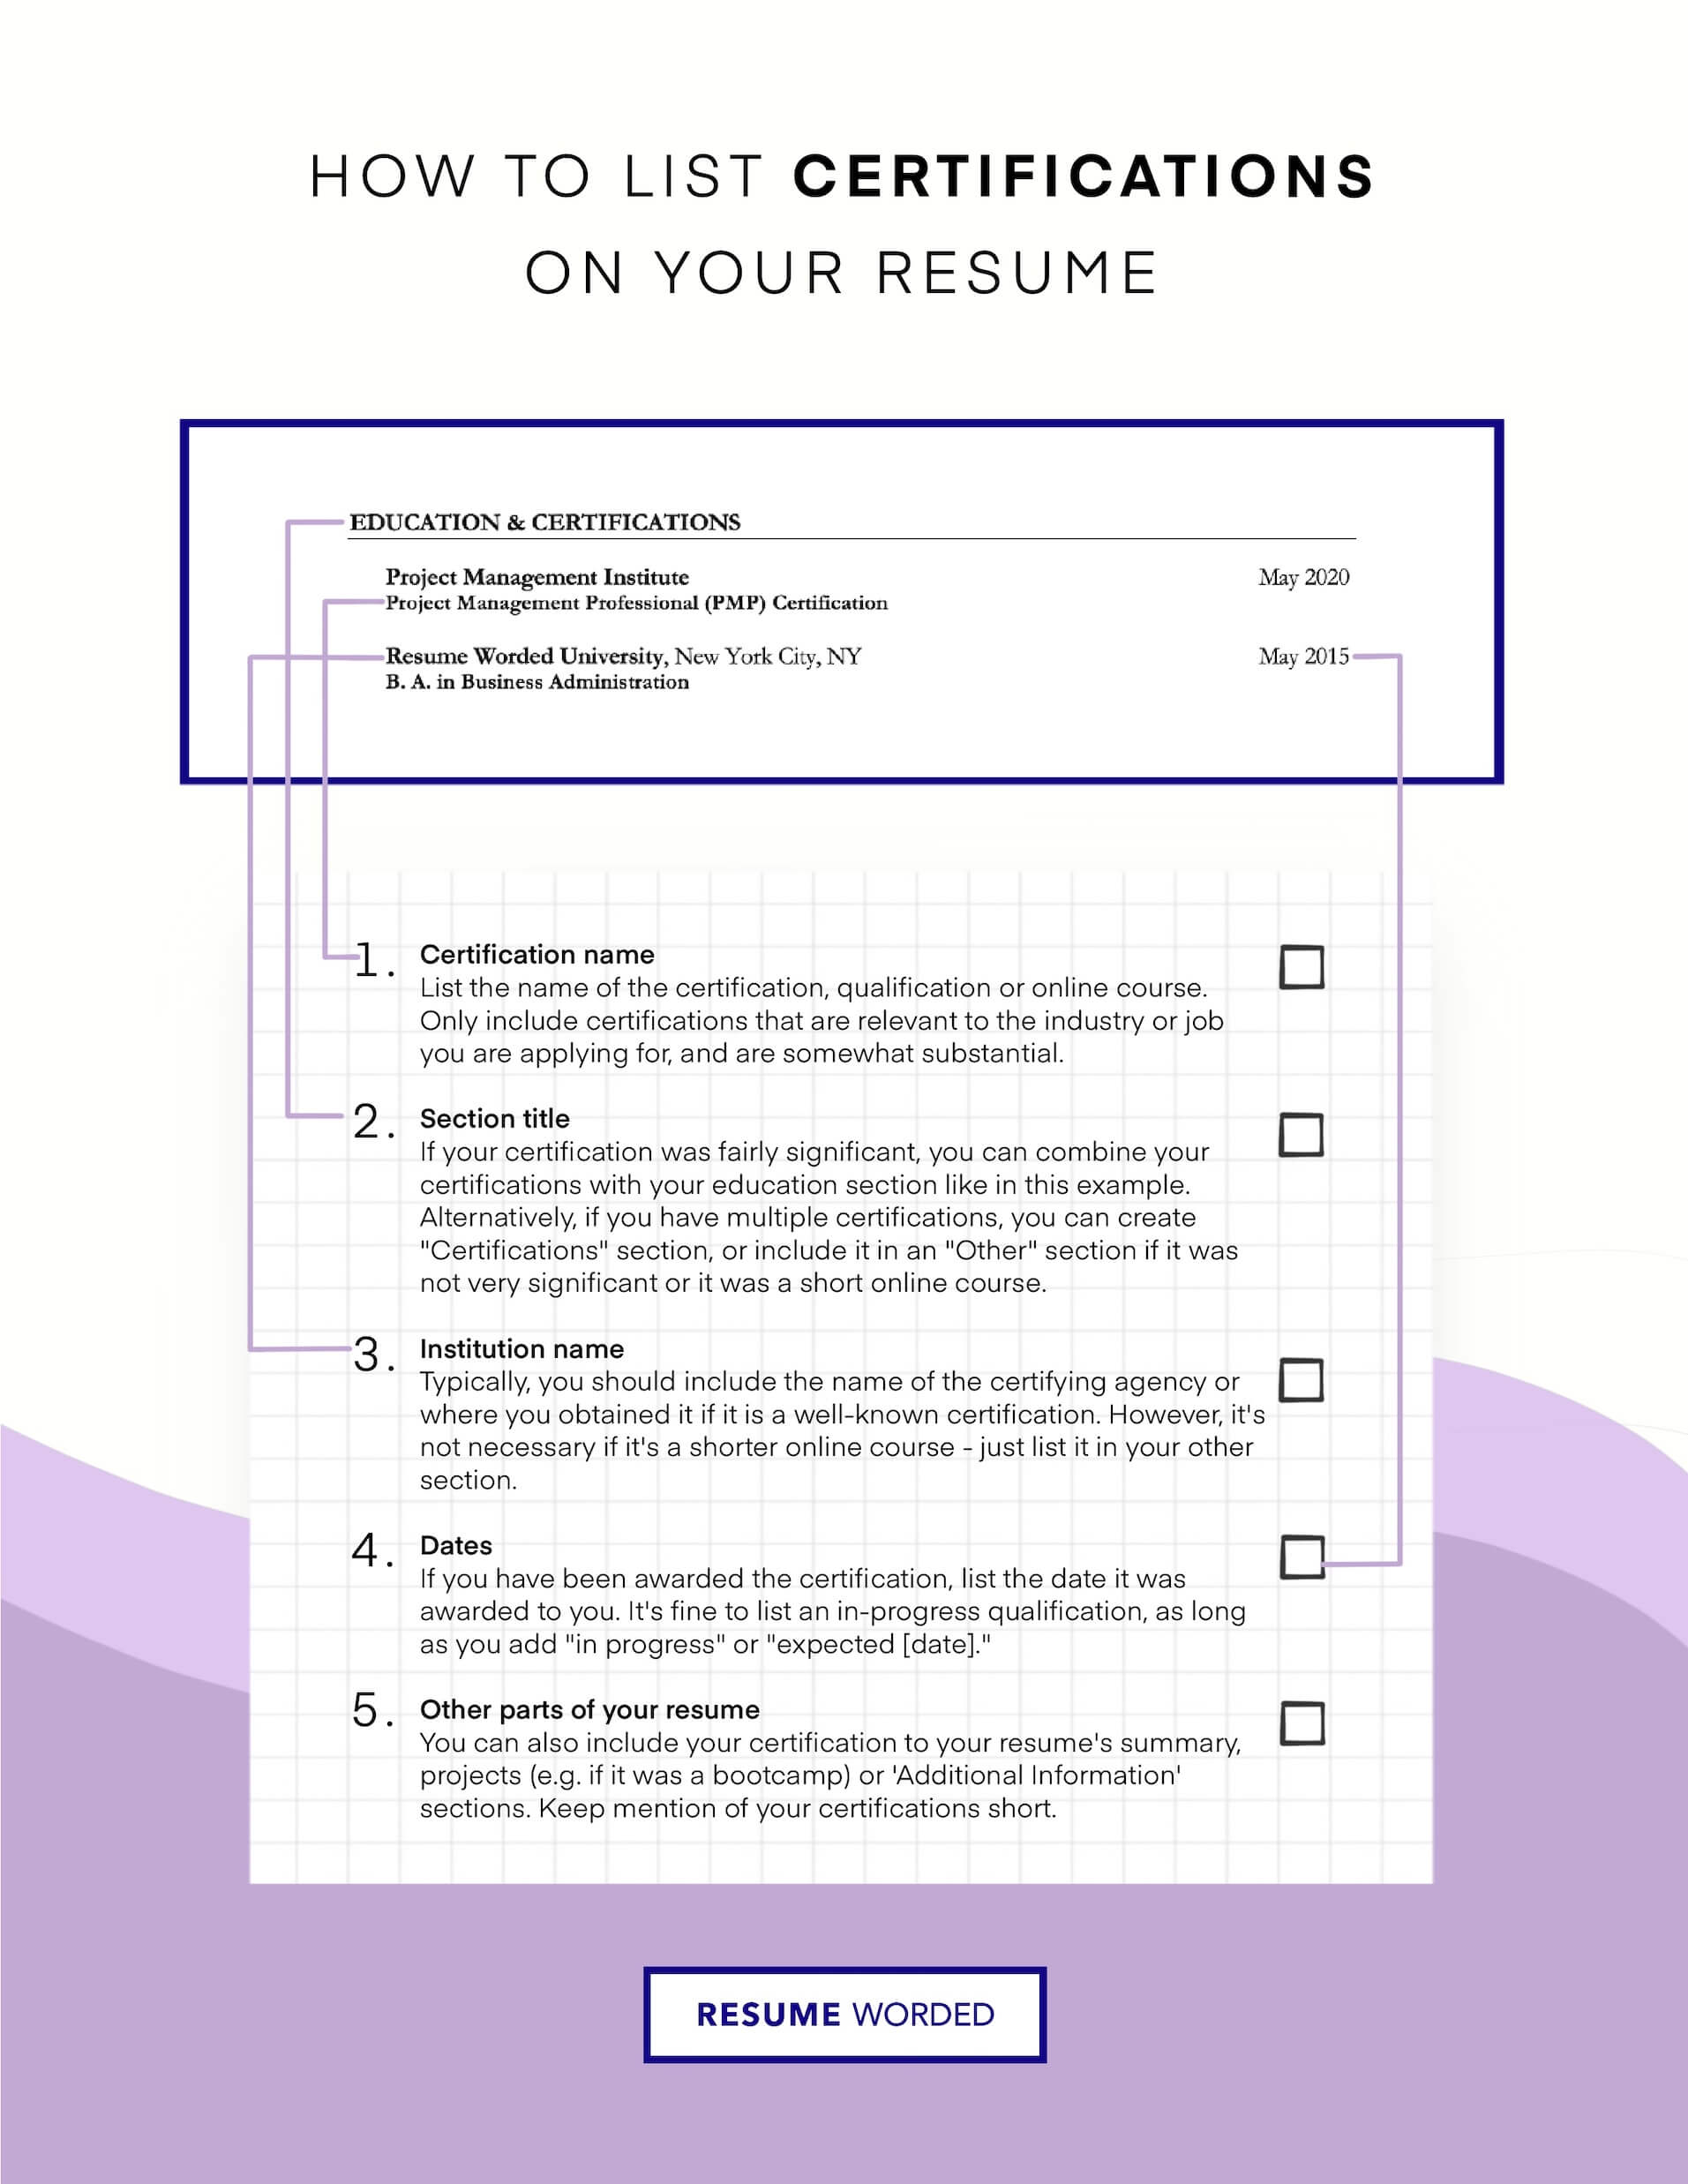 Include any loans or credit certification. - Loan Processor Resume